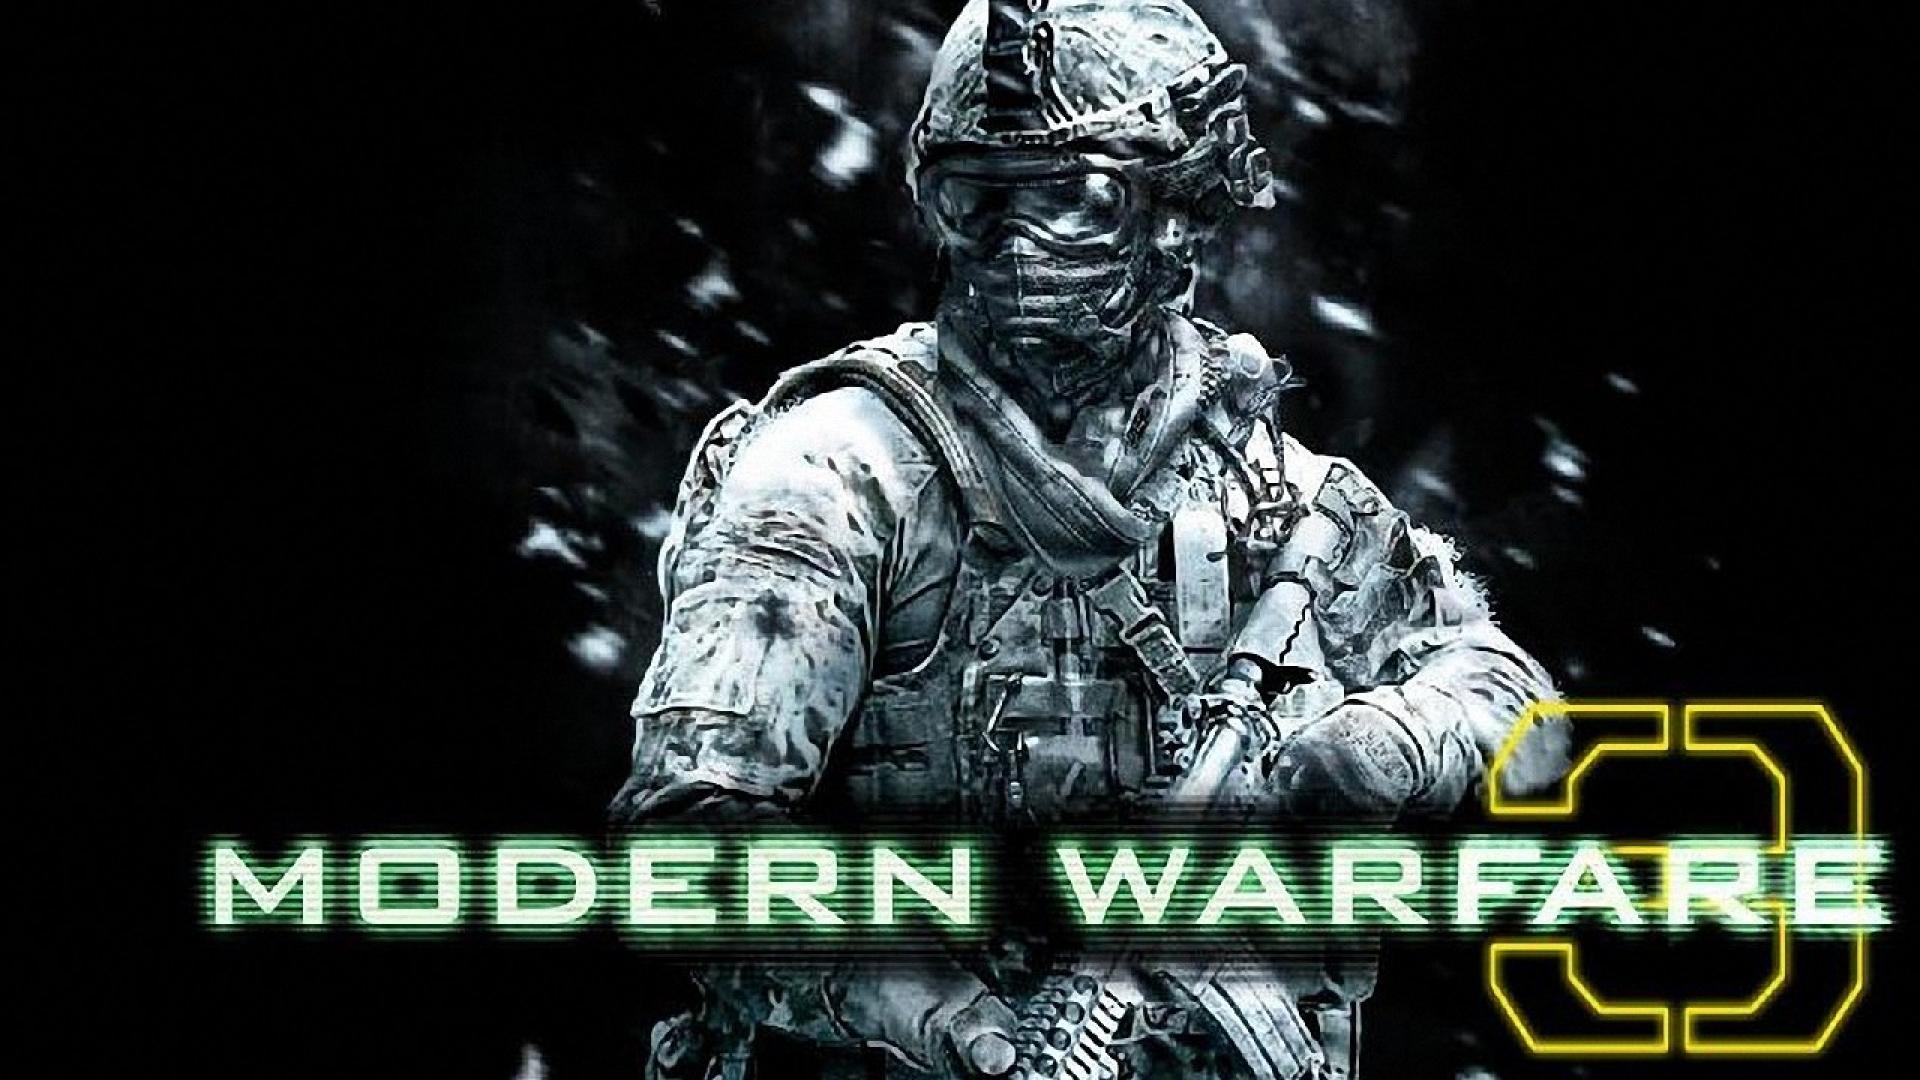 You will download Call of Duty Modern Warfare 3 resolution is